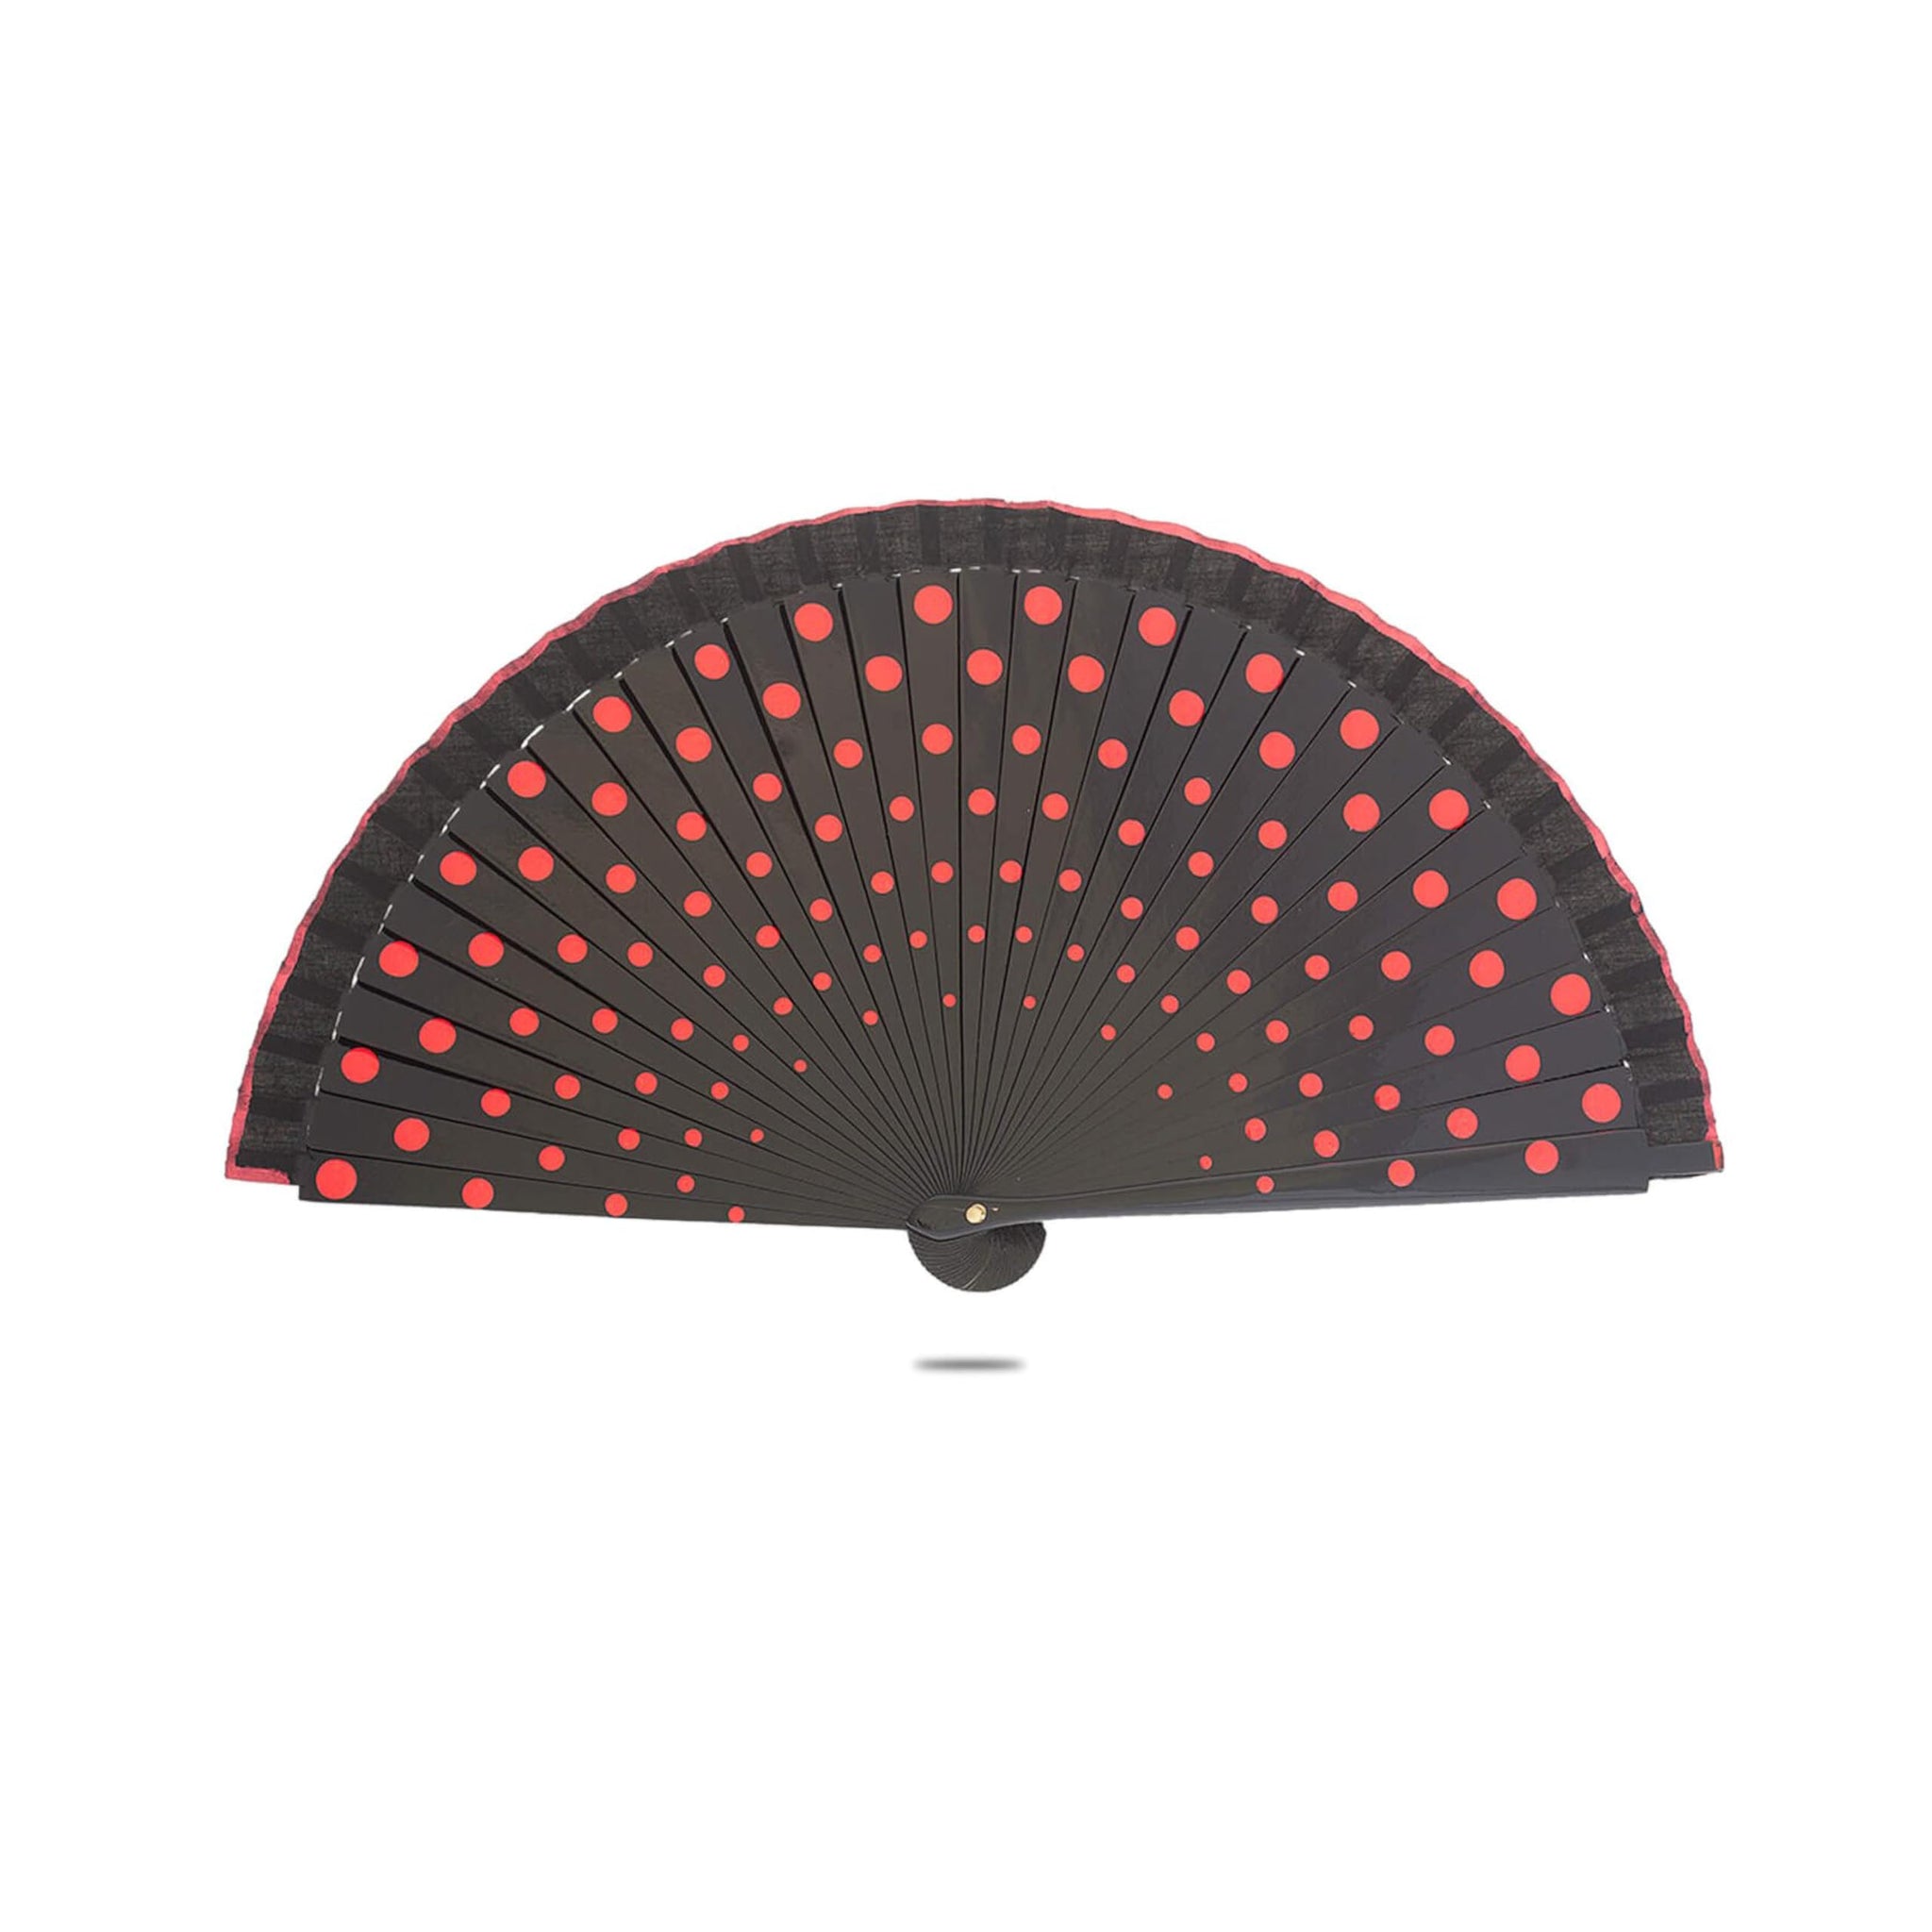 Ole Ole Flamenco Spanish Hand Fan Polka Dot 8 Inches 21 cm Made of Wood Two Sides Painted Abanicos Españoles Lunares (Black/Red Dots).